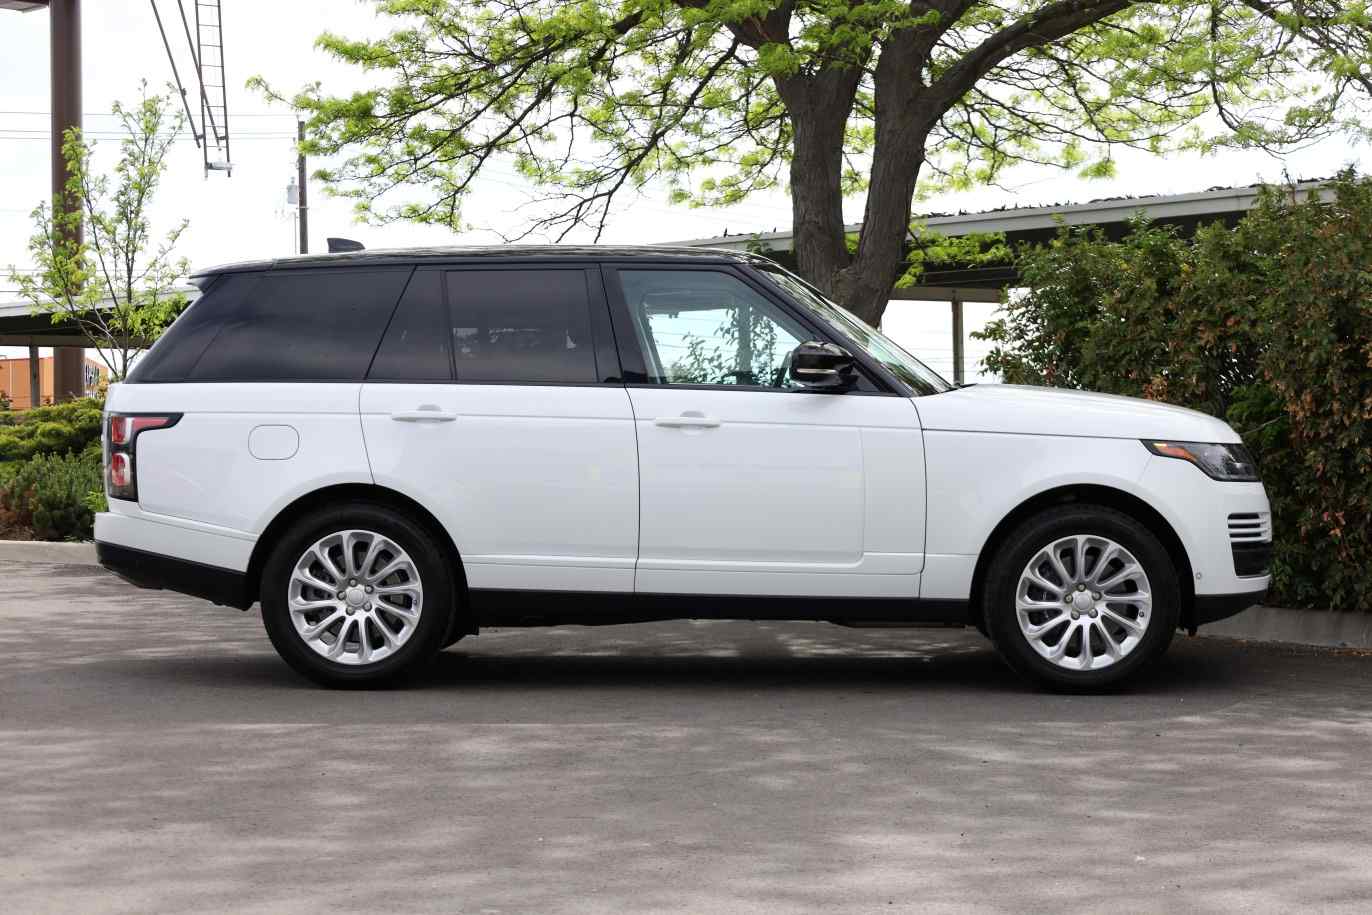 2018-land-rover-range-rover-hse-supercharged-for-sale-05